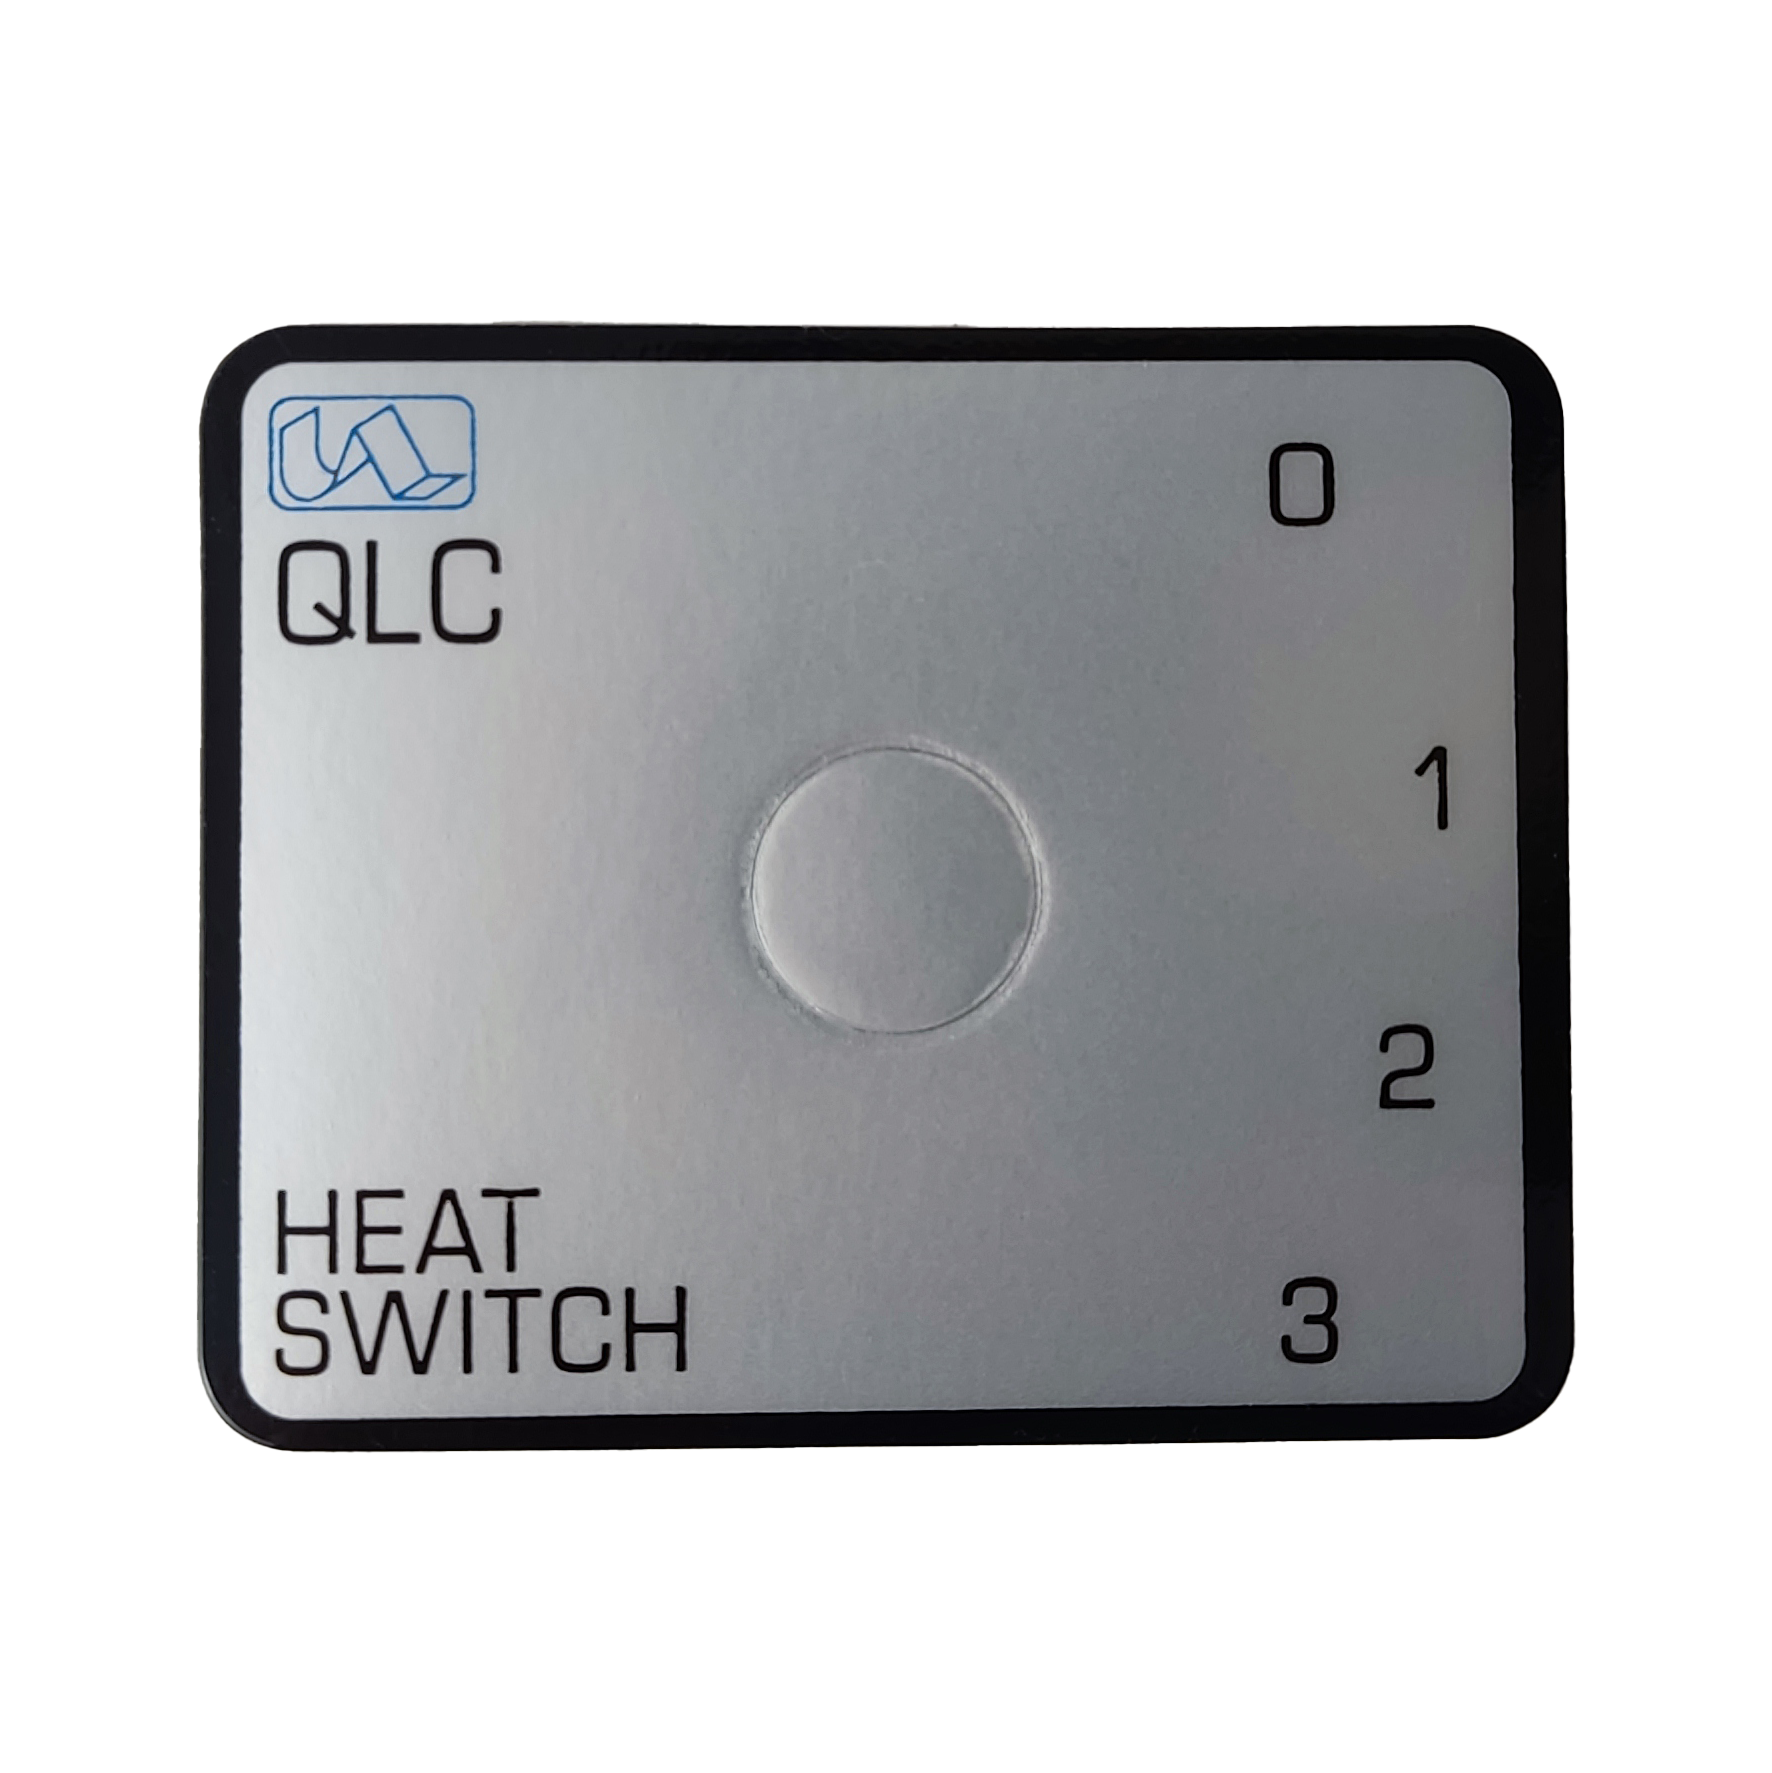 L60012-QLC-DIAL-LABEL- UNITED AUTOMATION